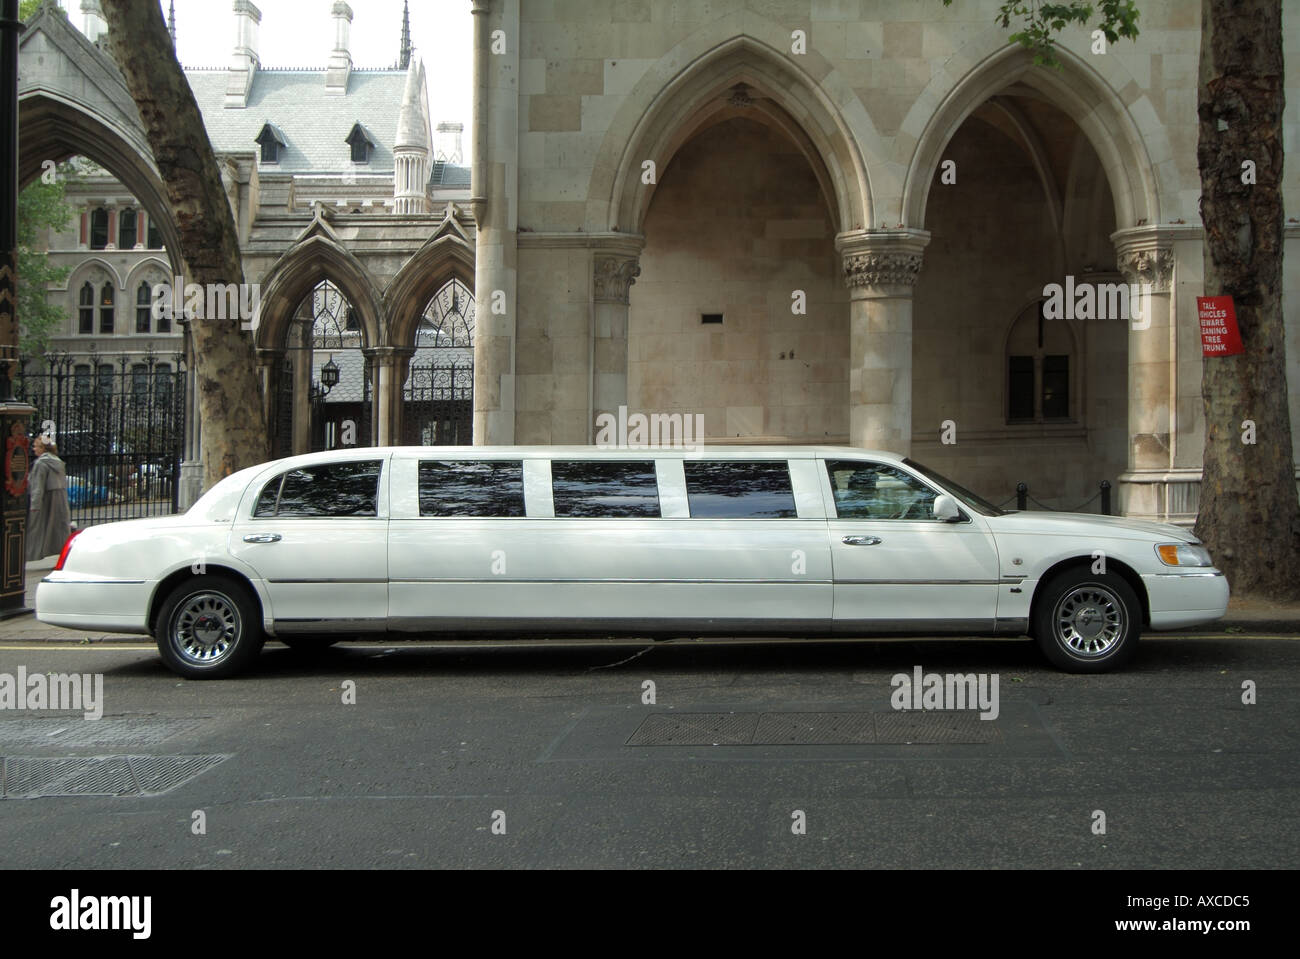 London white stretch limousine chauffeur driven luxury car parked in The Strand at the Law Courts for a special occasion Stock Photo